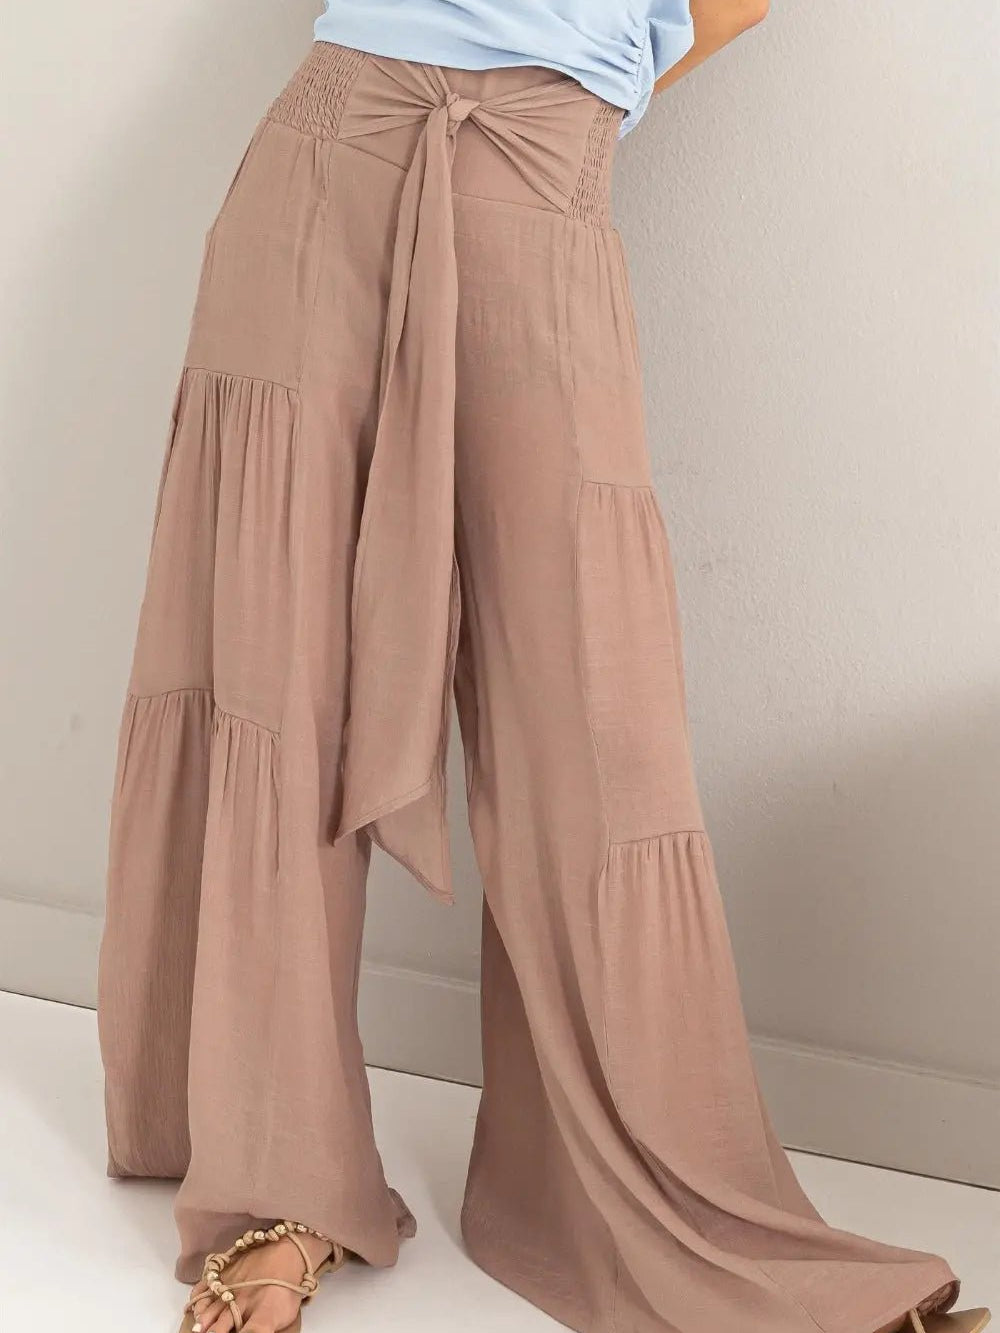 RUCHED TIERED TIE FRONT WIDE LEG PANTS LOOSE FIT TROUSERS - MeadeuxRUCHED TIERED TIE FRONT WIDE LEG PANTS LOOSE FIT TROUSERSBottomsMeadeux